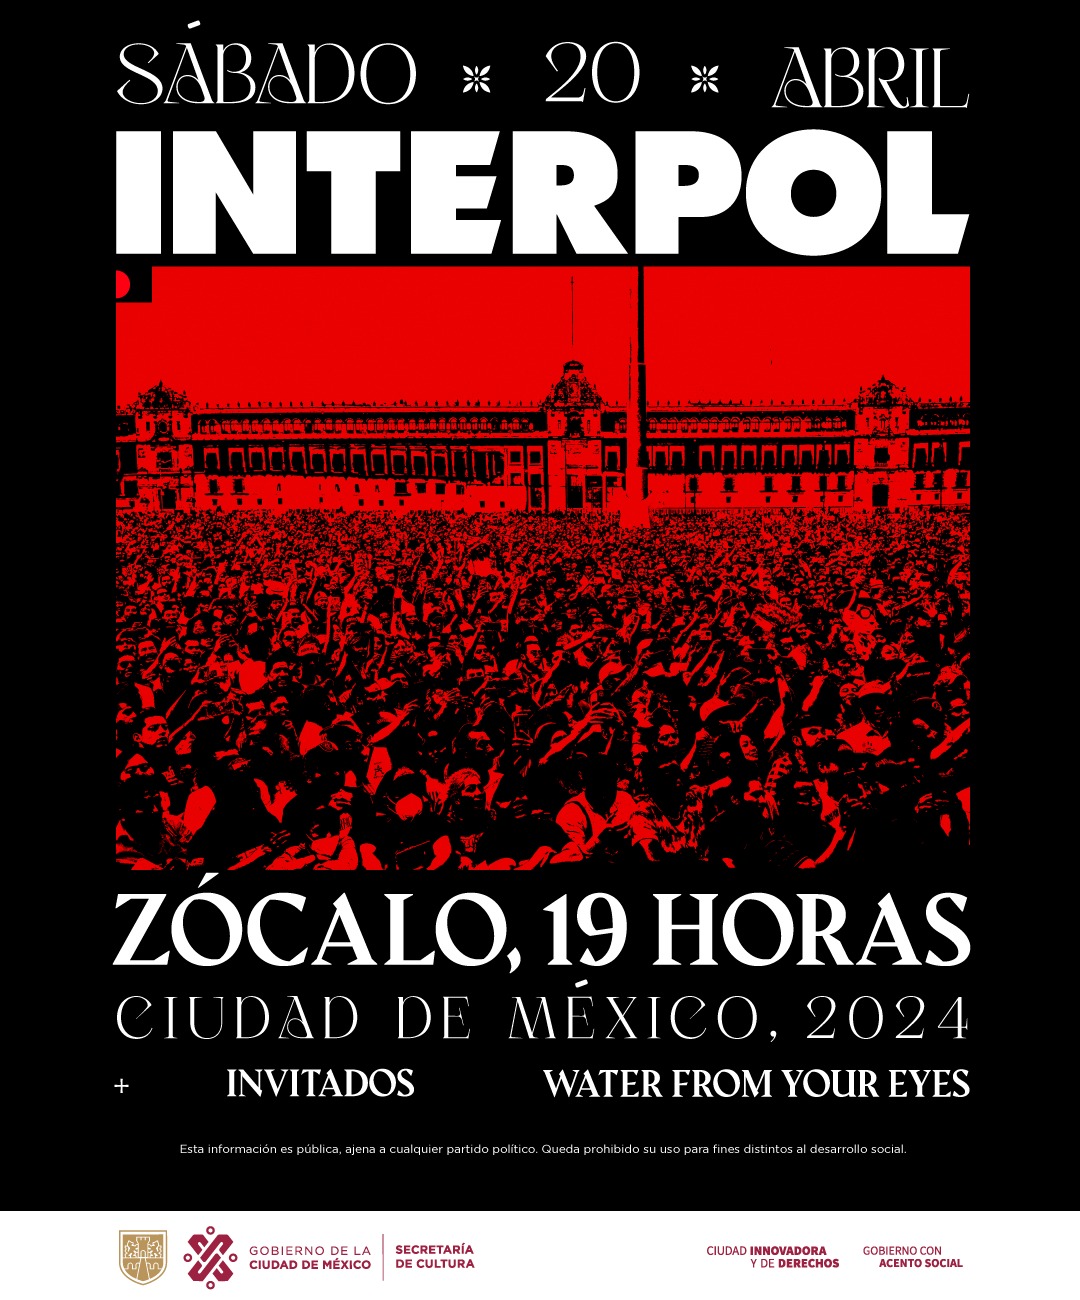 Interpol Zocalo Water From Your Eyes